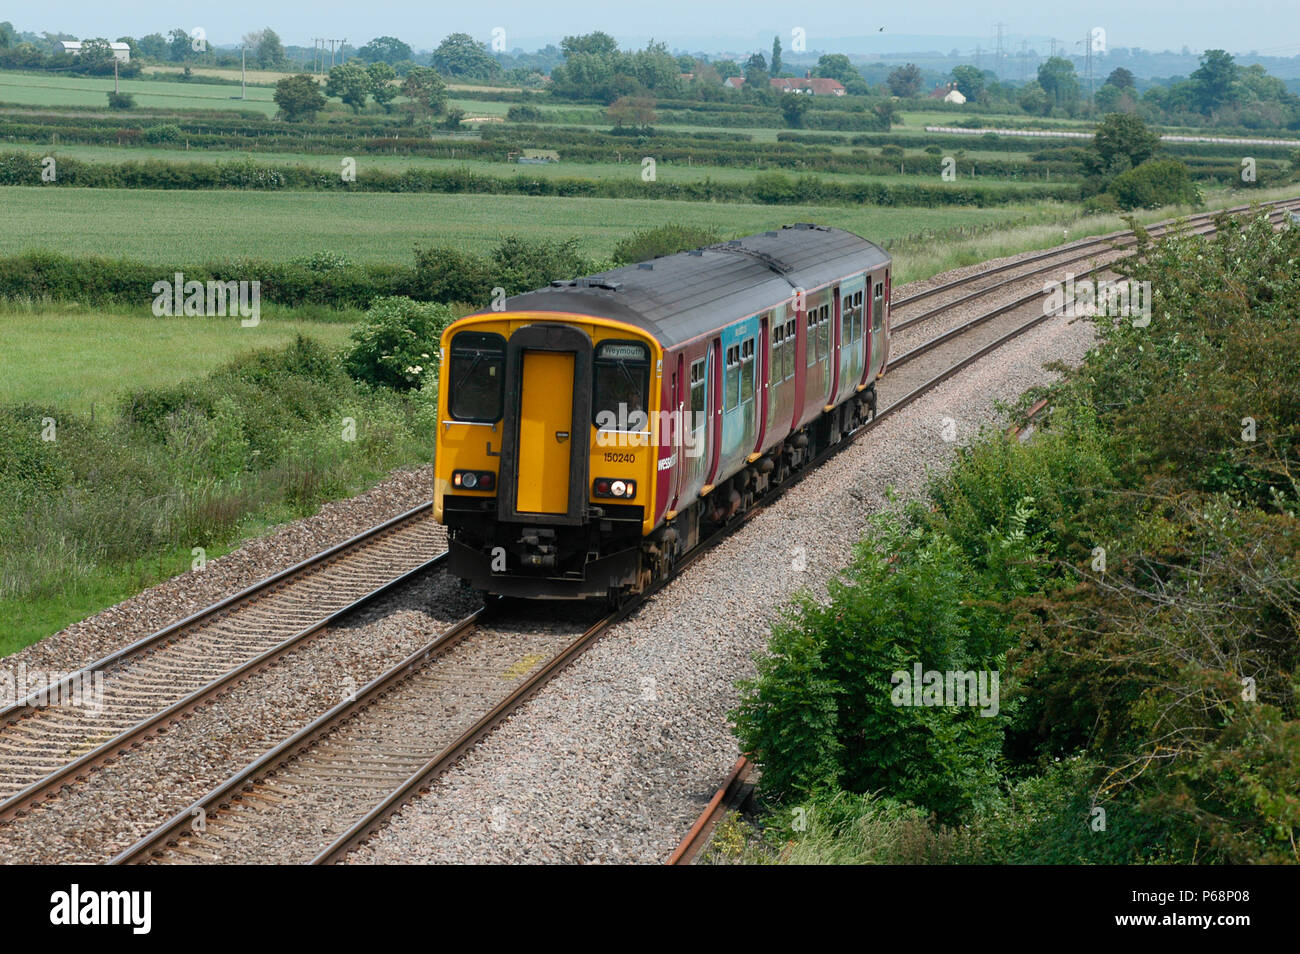 The local train services around the Bristol area are operated by Wessex Trains using a mixed fleet of Sprinter and Pacer units identified by dedicated Stock Photo